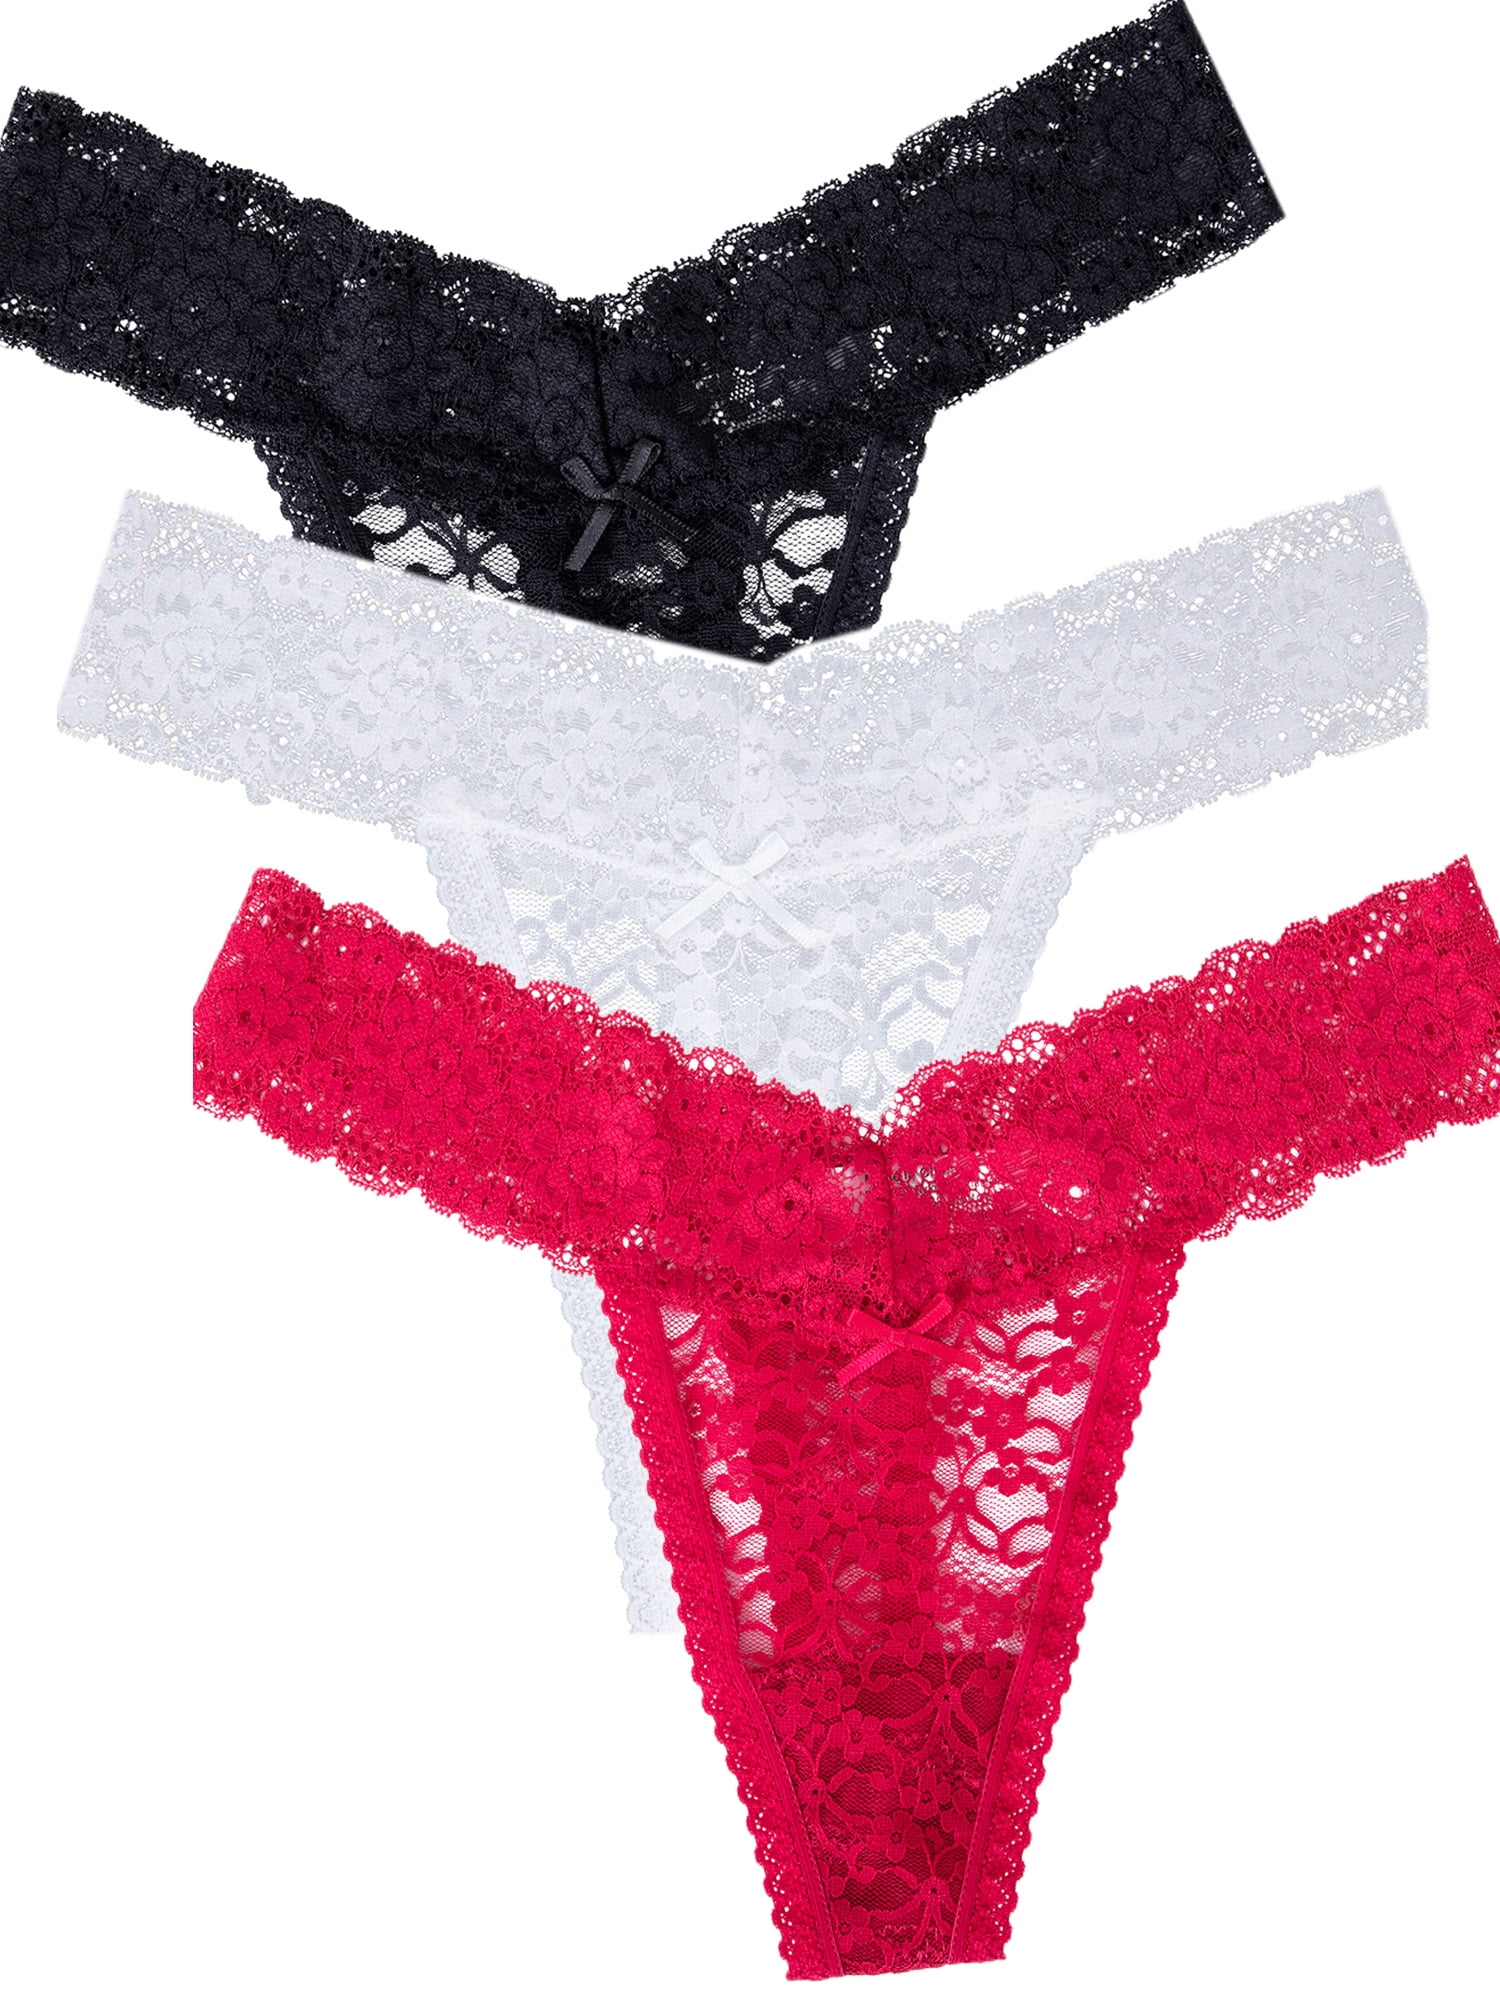 3 Pack Womens  Panties Briefs Lace Thong G-Strings T-back Underwear Lingerie KY 